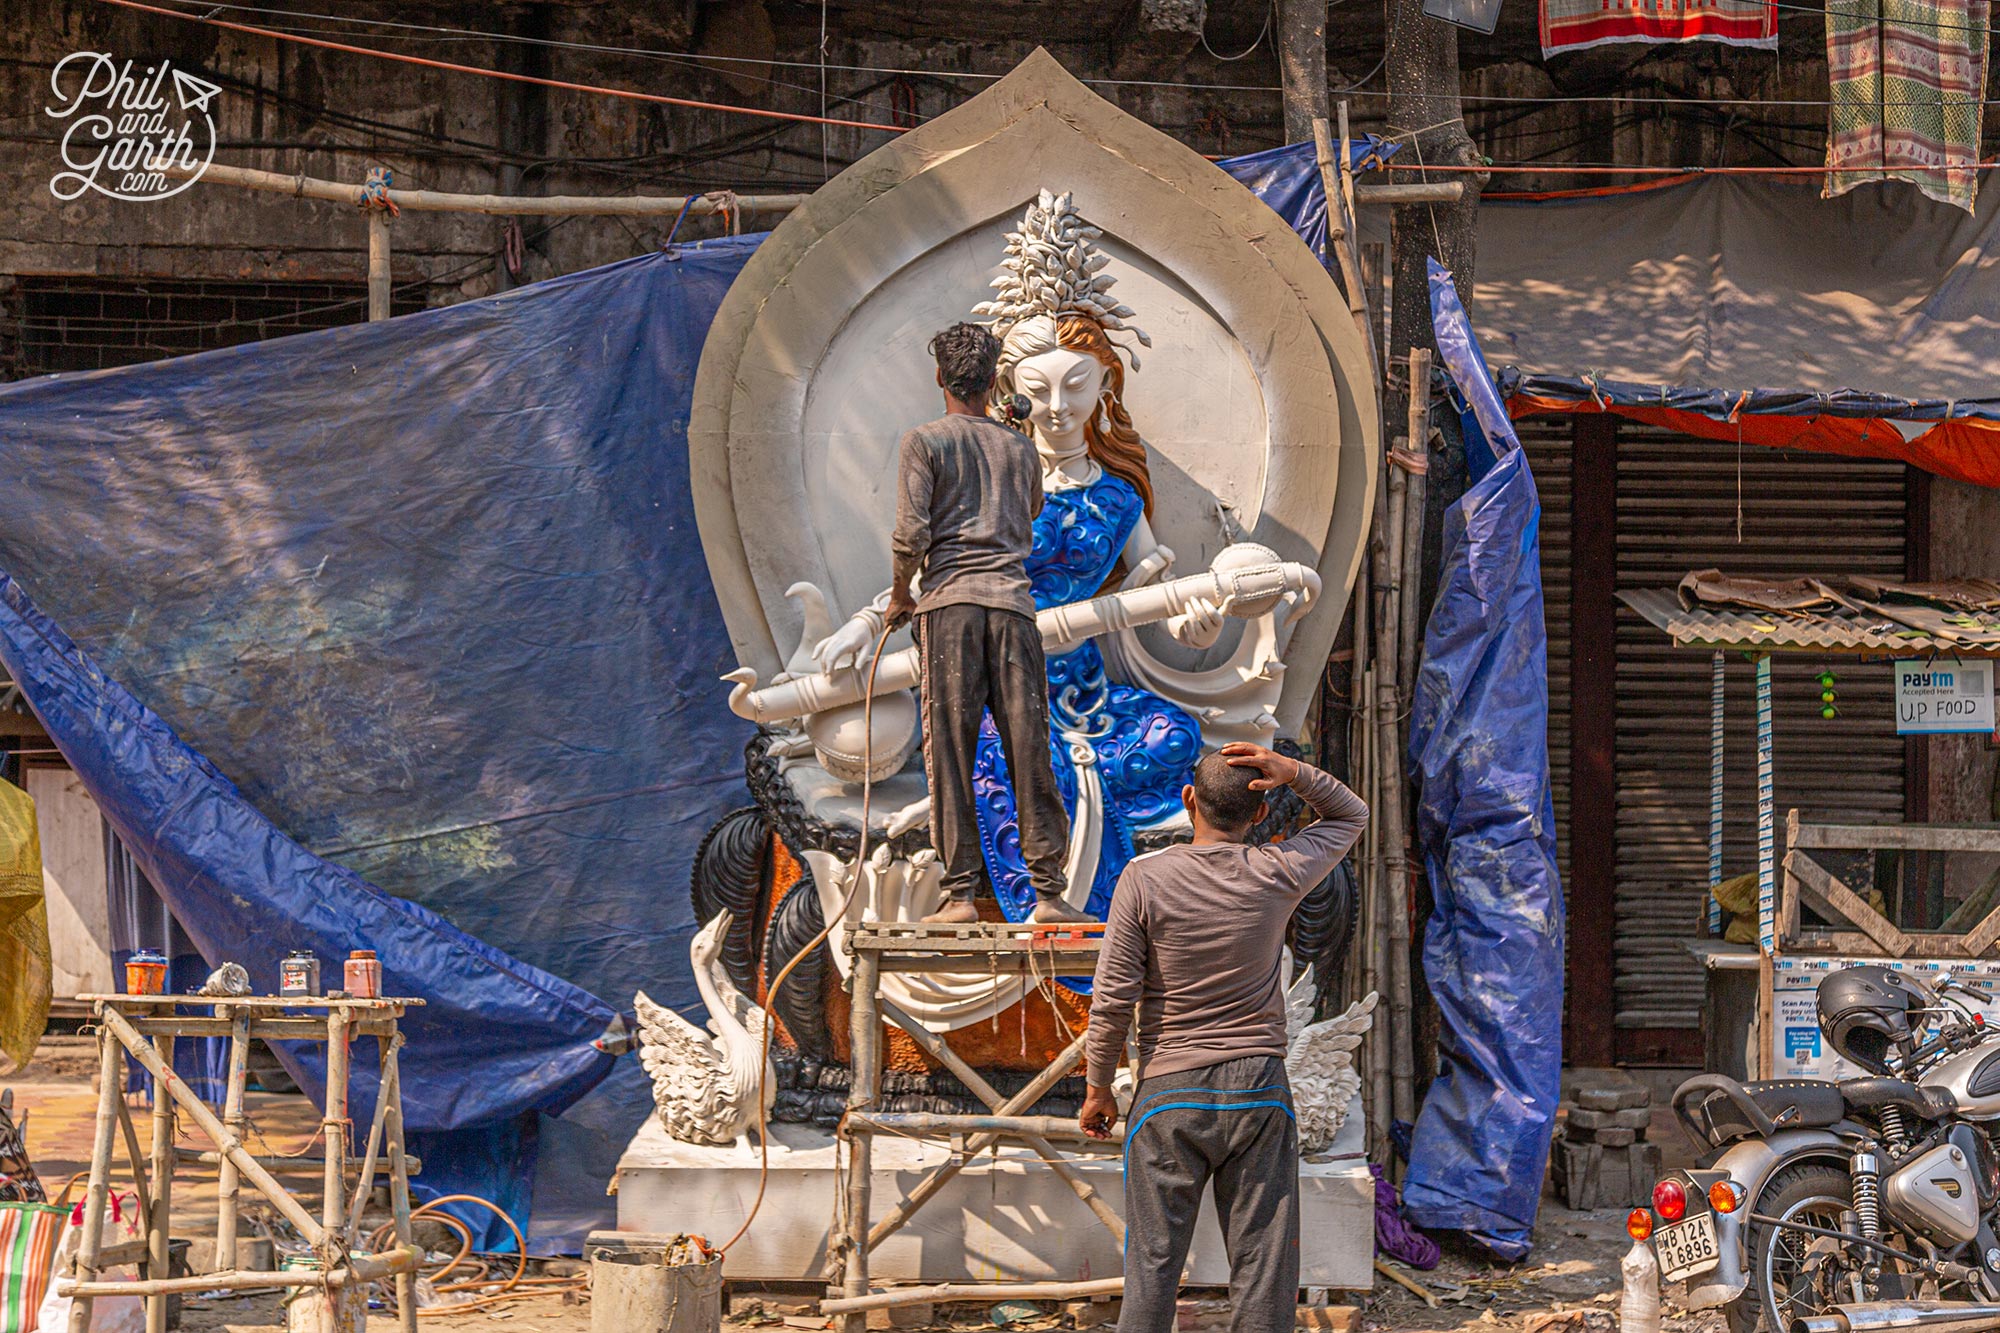 An artist airbrushing a large statue on the street